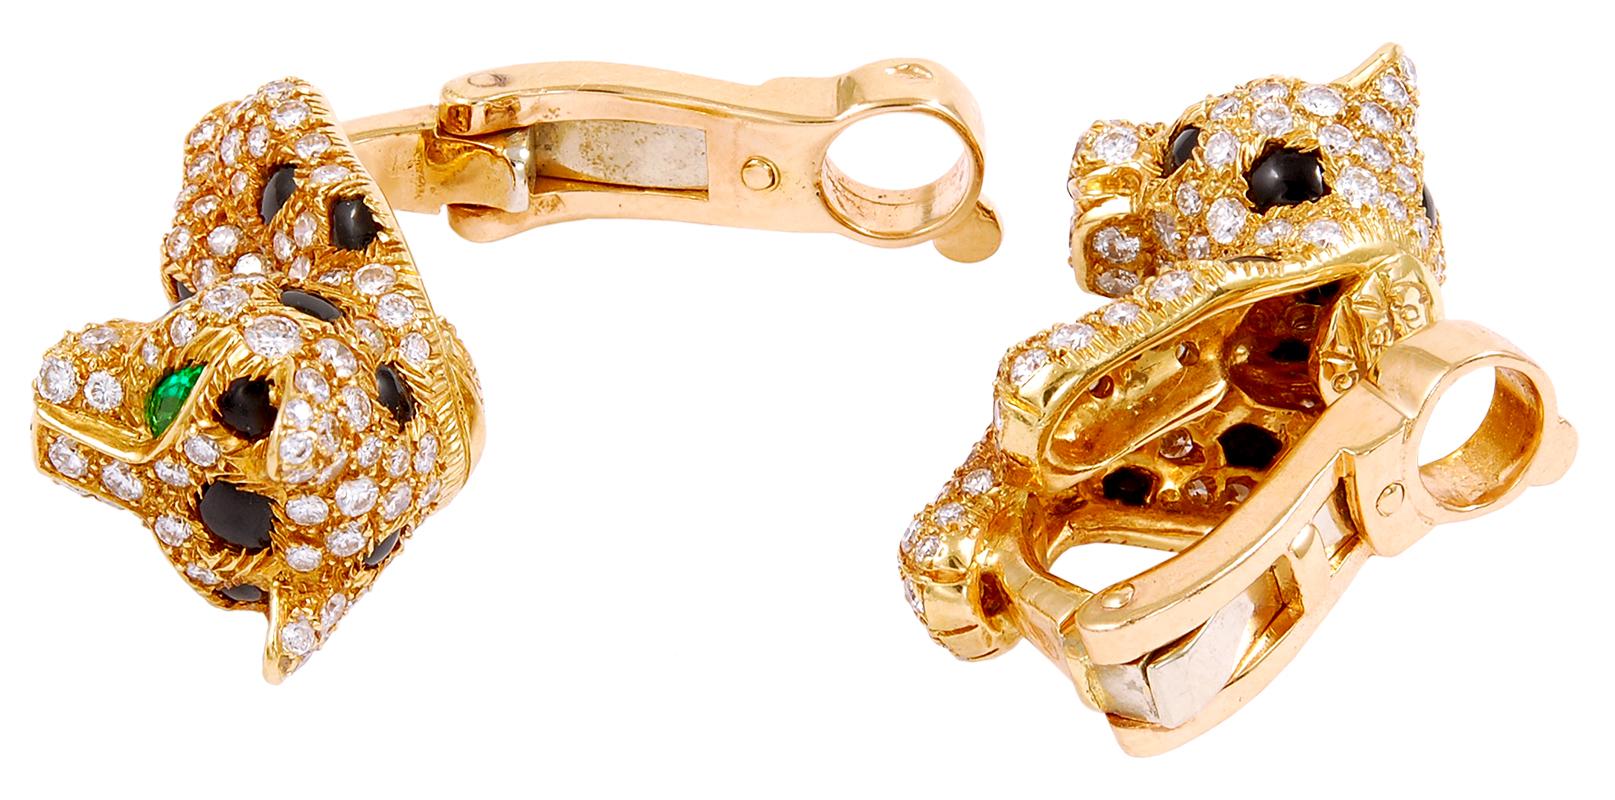 Cartier Panthere Vintage Diamond Pave Earrings in 18k Yellow Gold.
A pair of vintage mini Panthère de Cartier on-the-ear clips featuring their brilliant creature of 1970s design. White diamonds embedded in yellow gold starkly contrast emerald eyes